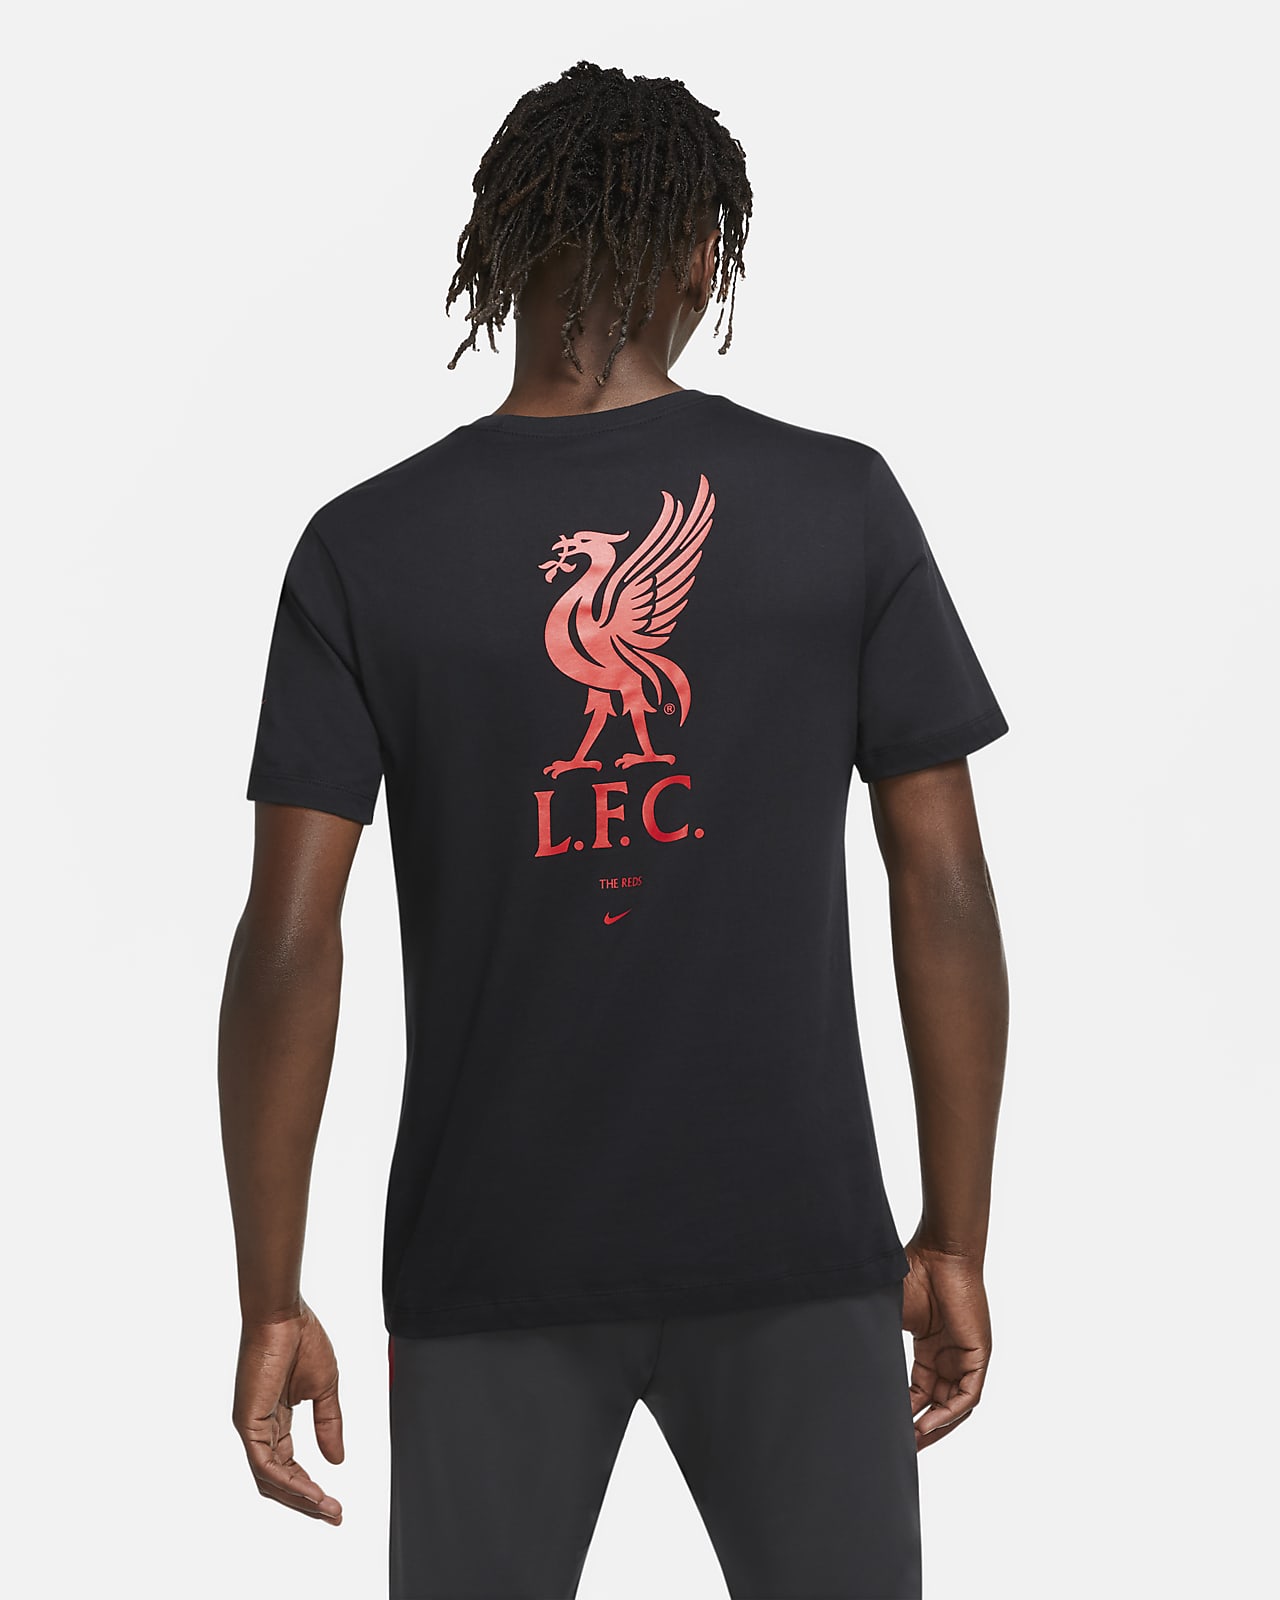 liverpool t shirts for sale